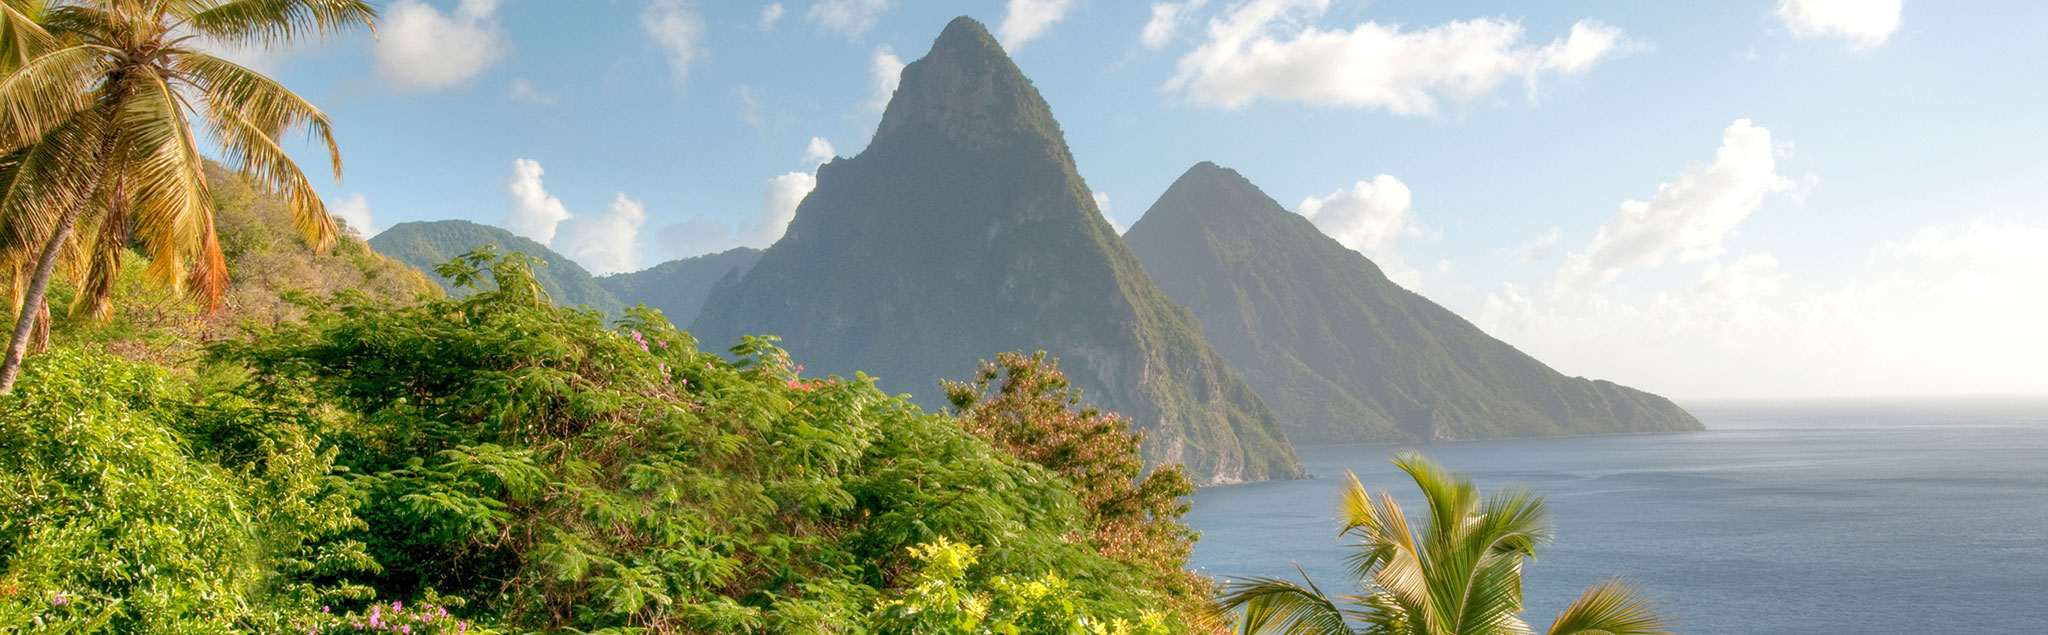 The Pitons: A Unique Point of View